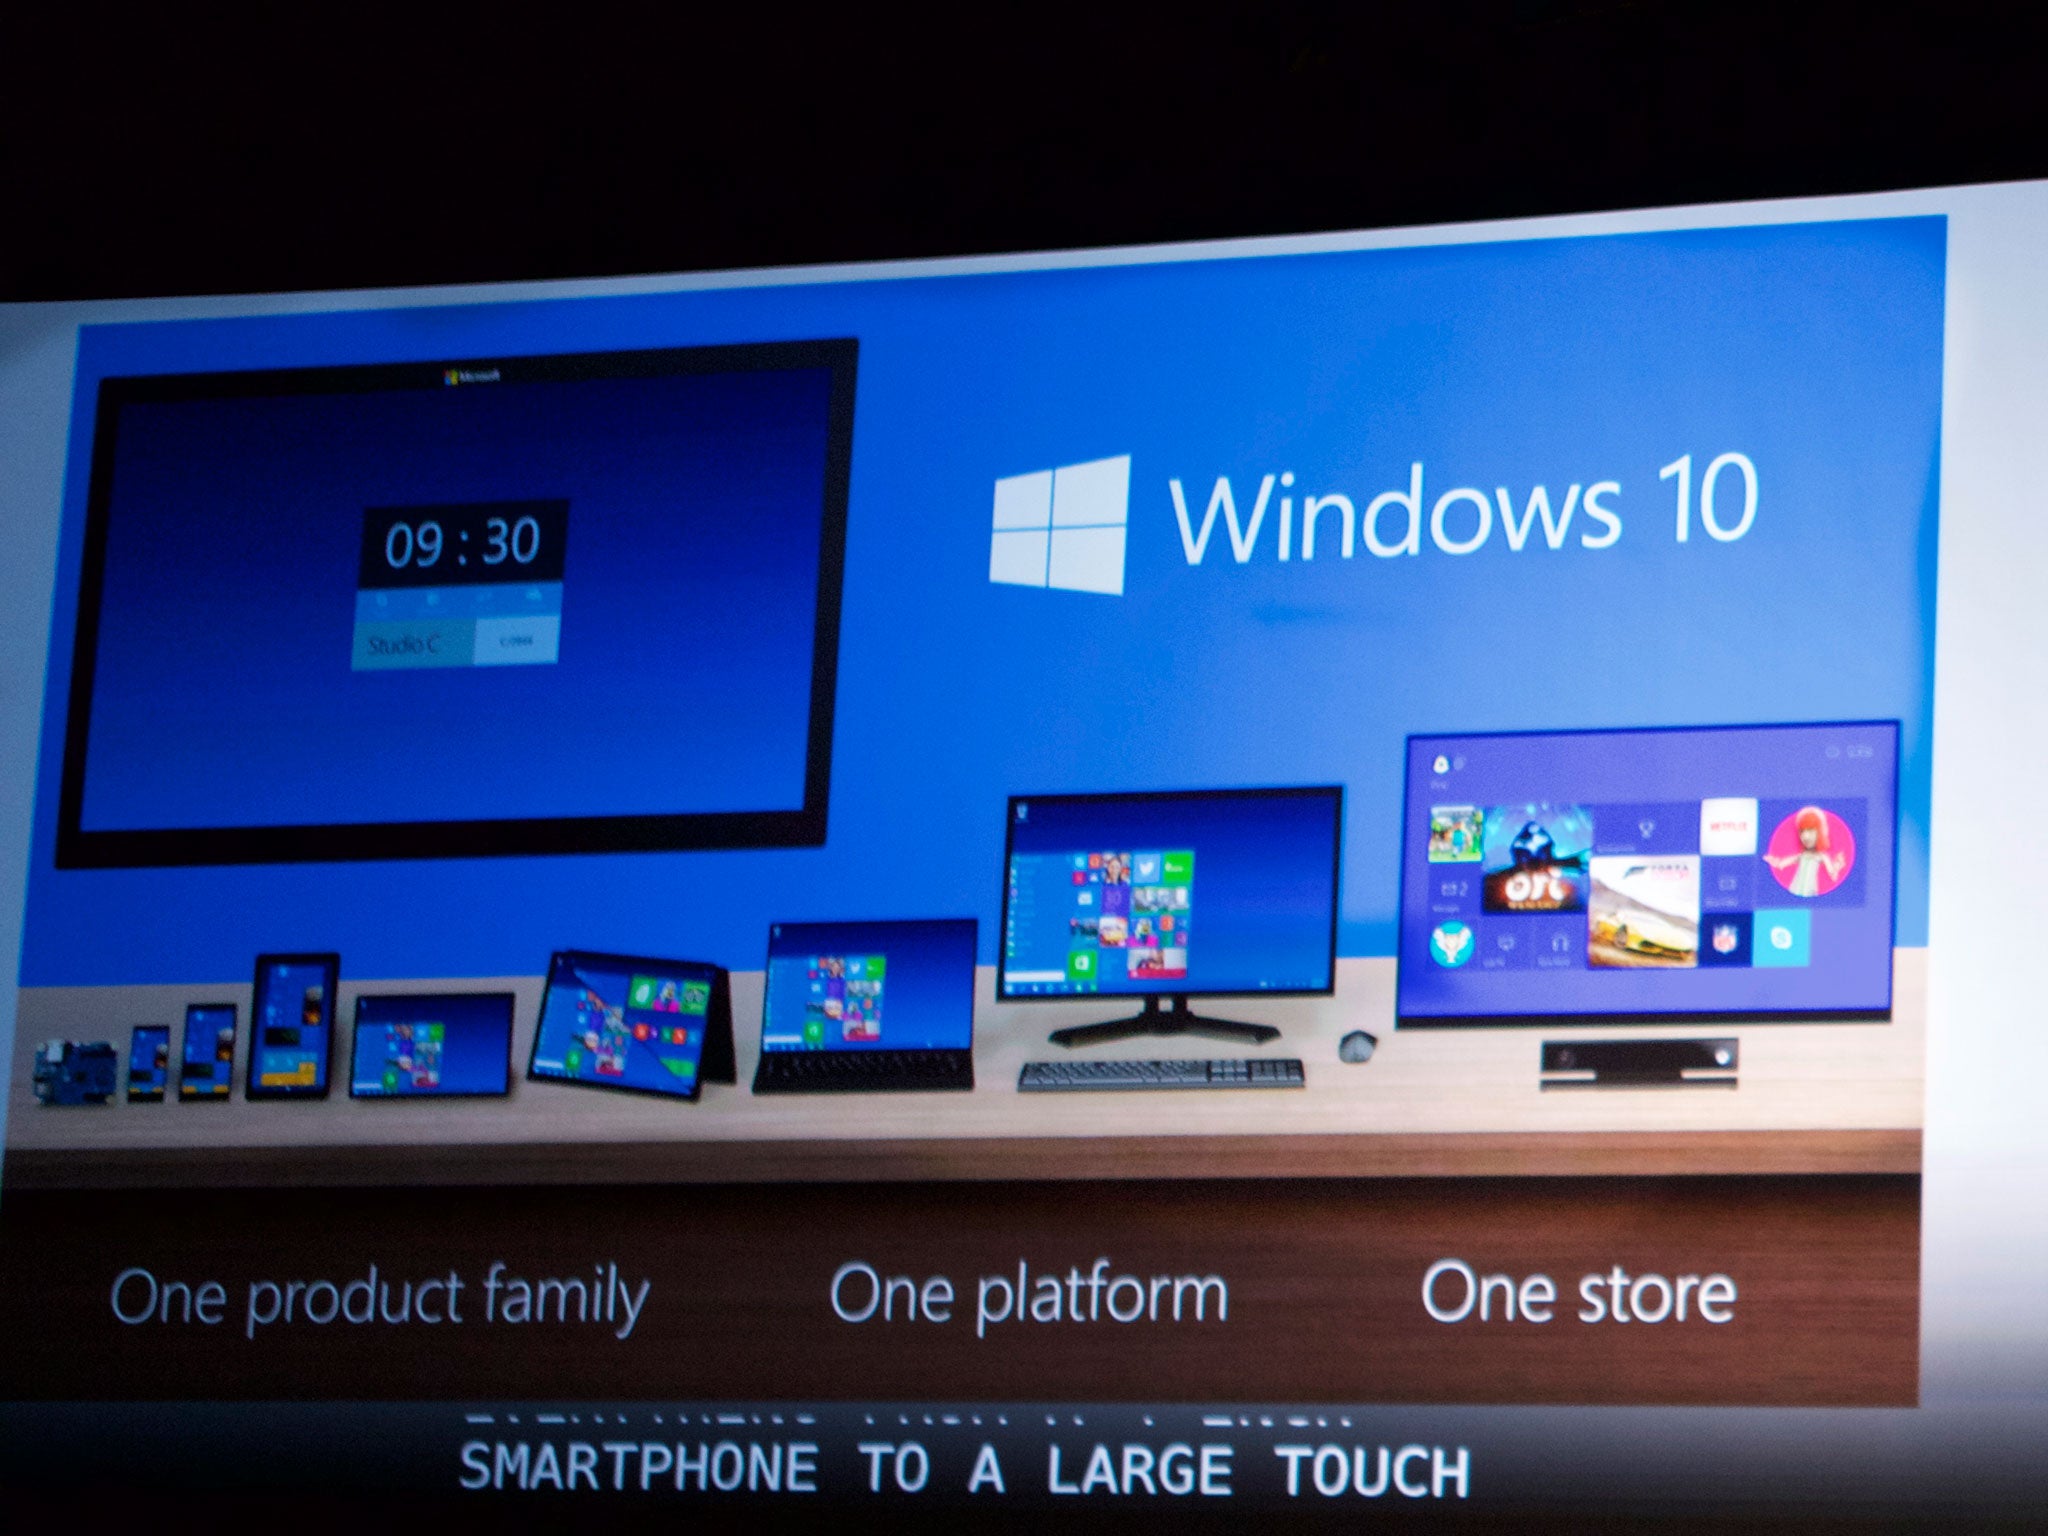 Windows 10 was released in the UK on 29 July